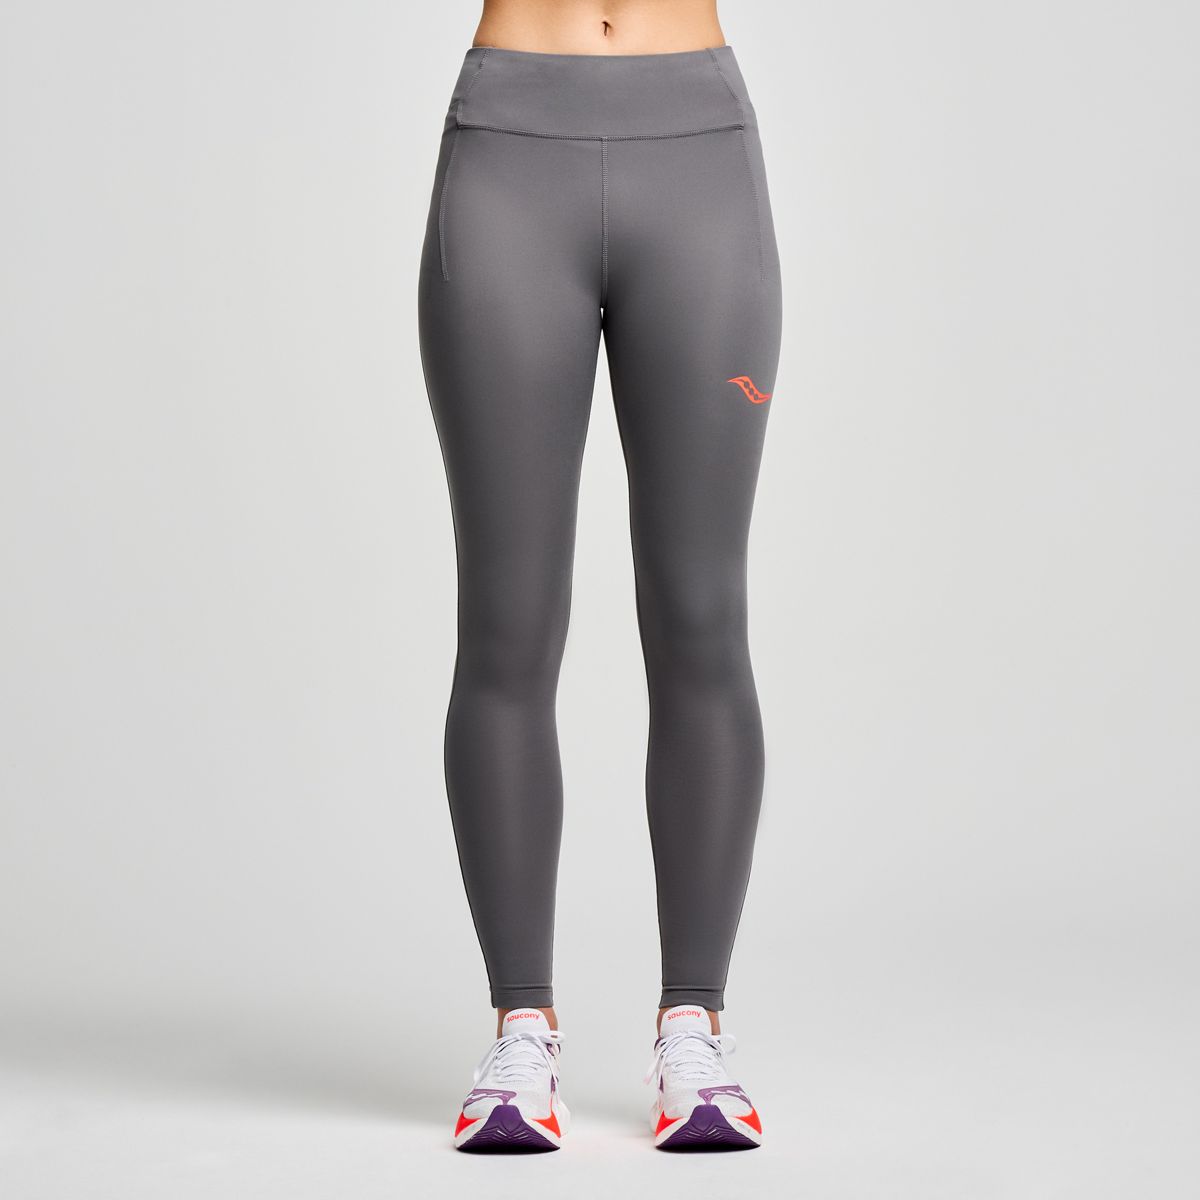 Running Pants & Tights for Women